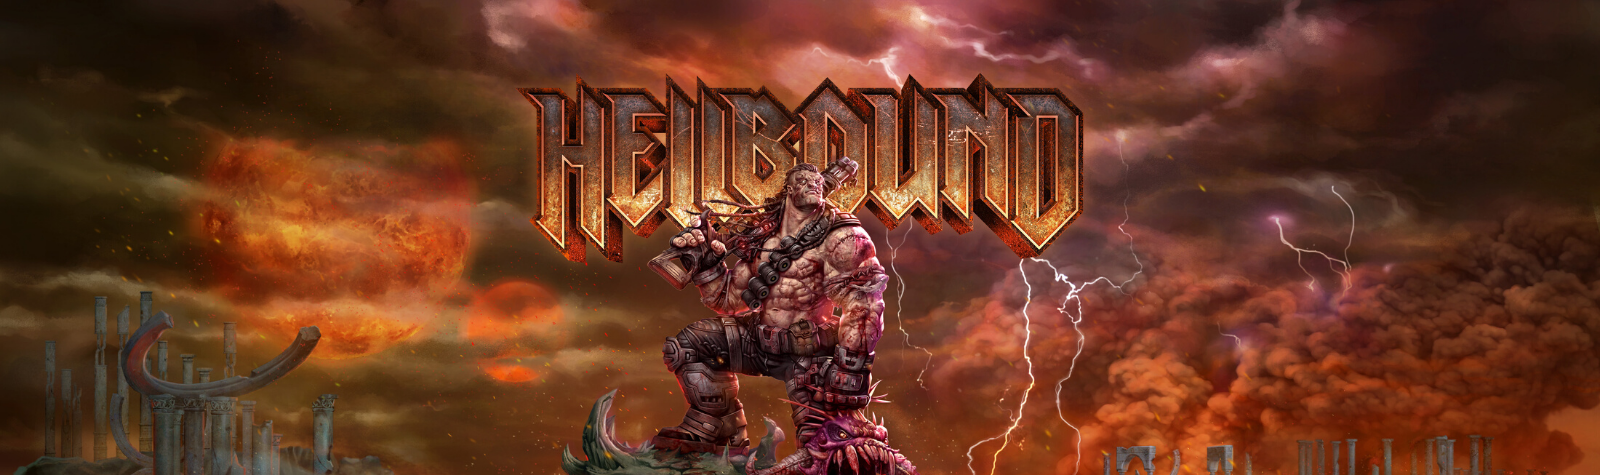 Hellbound highlighted in the Steam Summer Festival